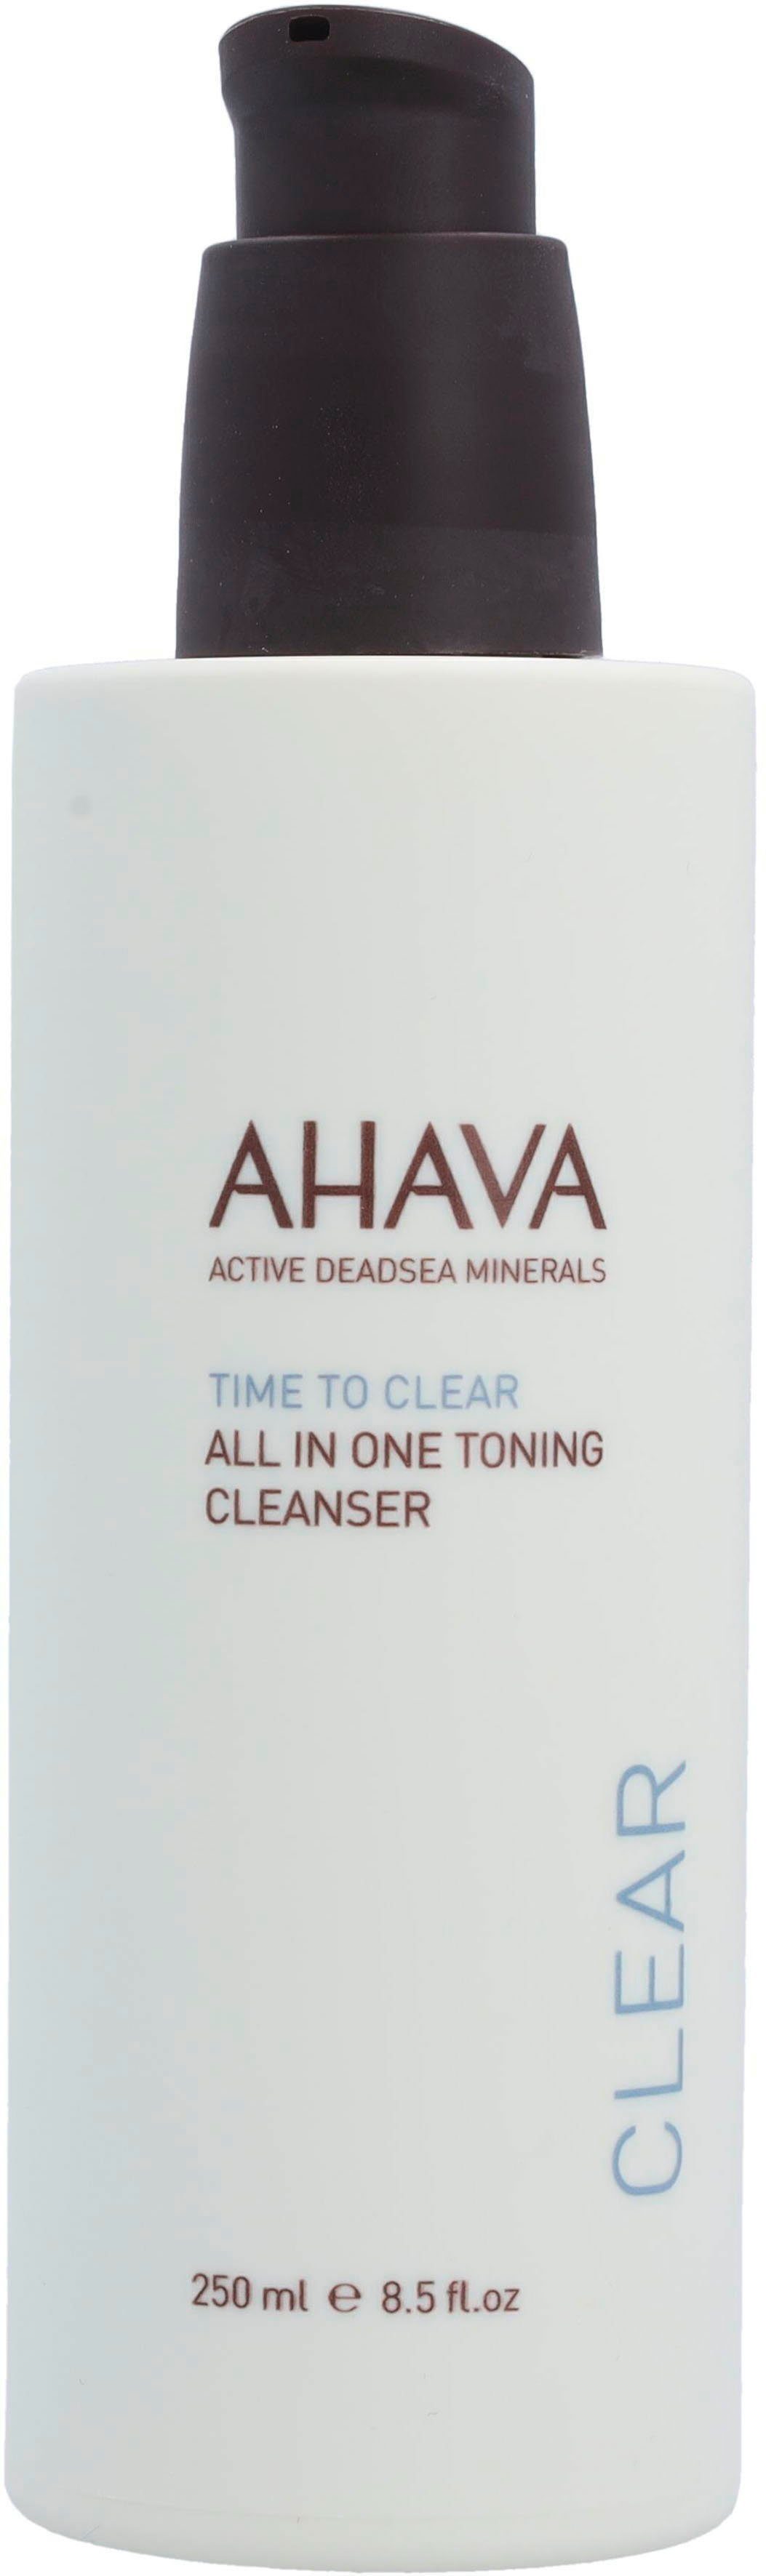 To One AHAVA All Cleanser Toning Gesichts-Reinigungslotion Clear Time In